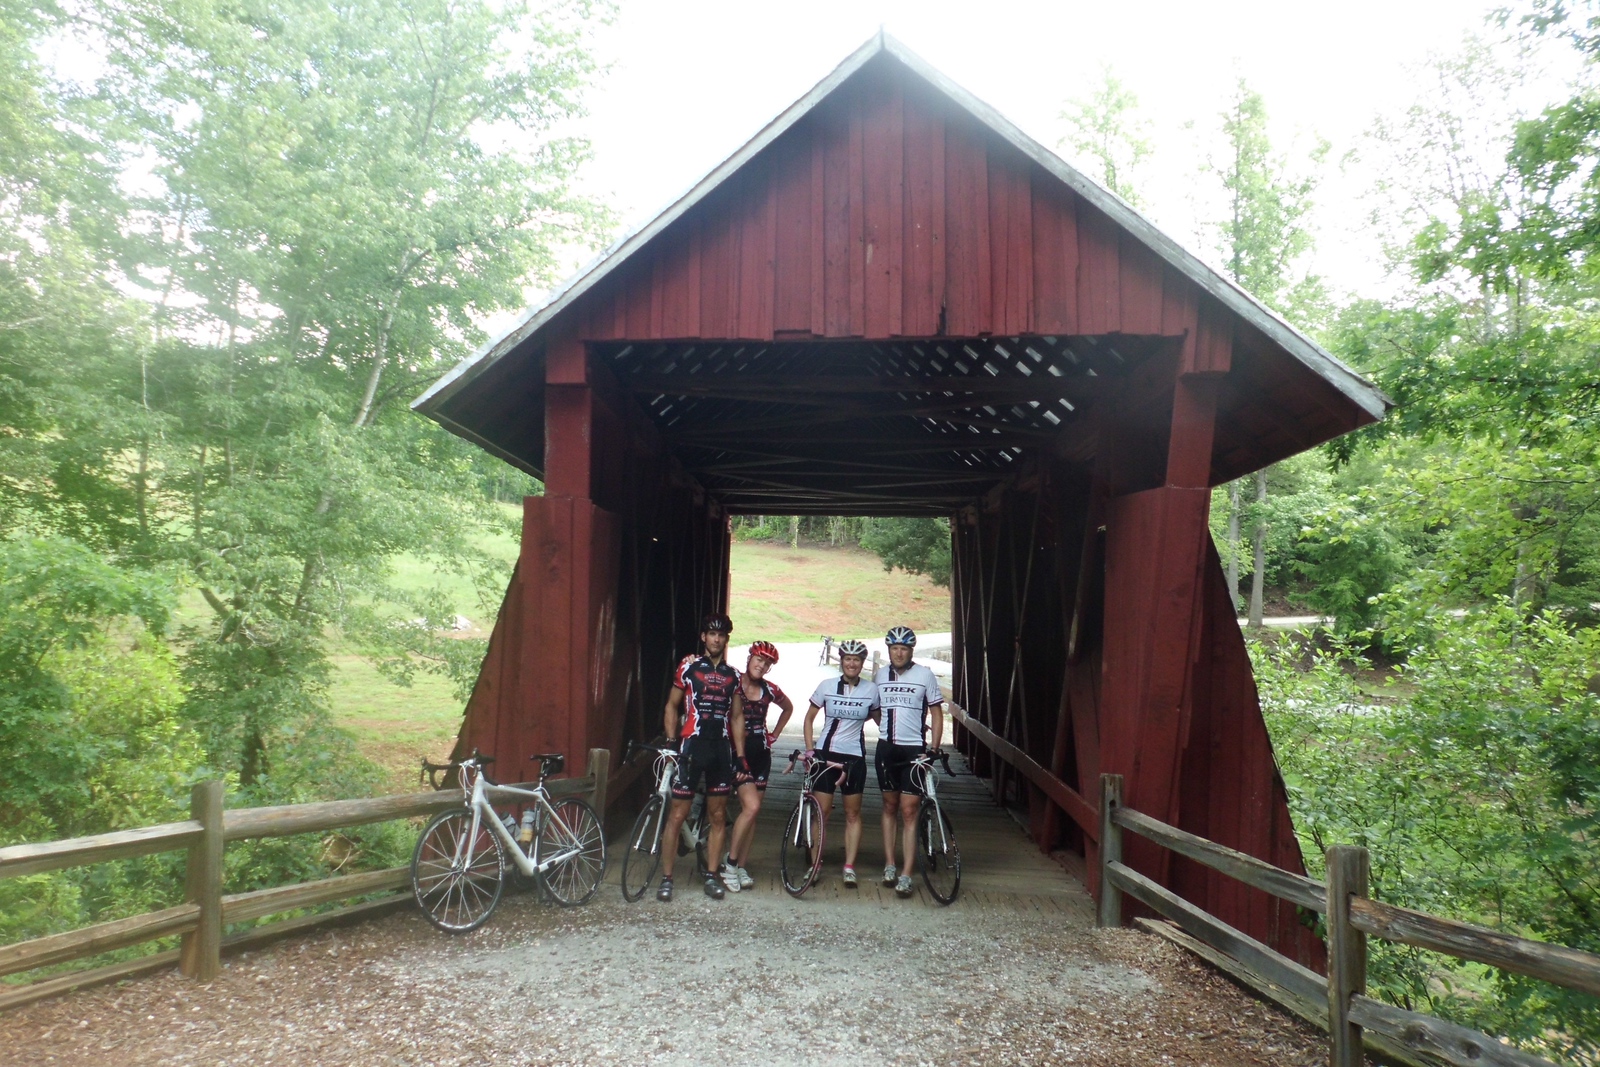 Campbell's Covered Bridge